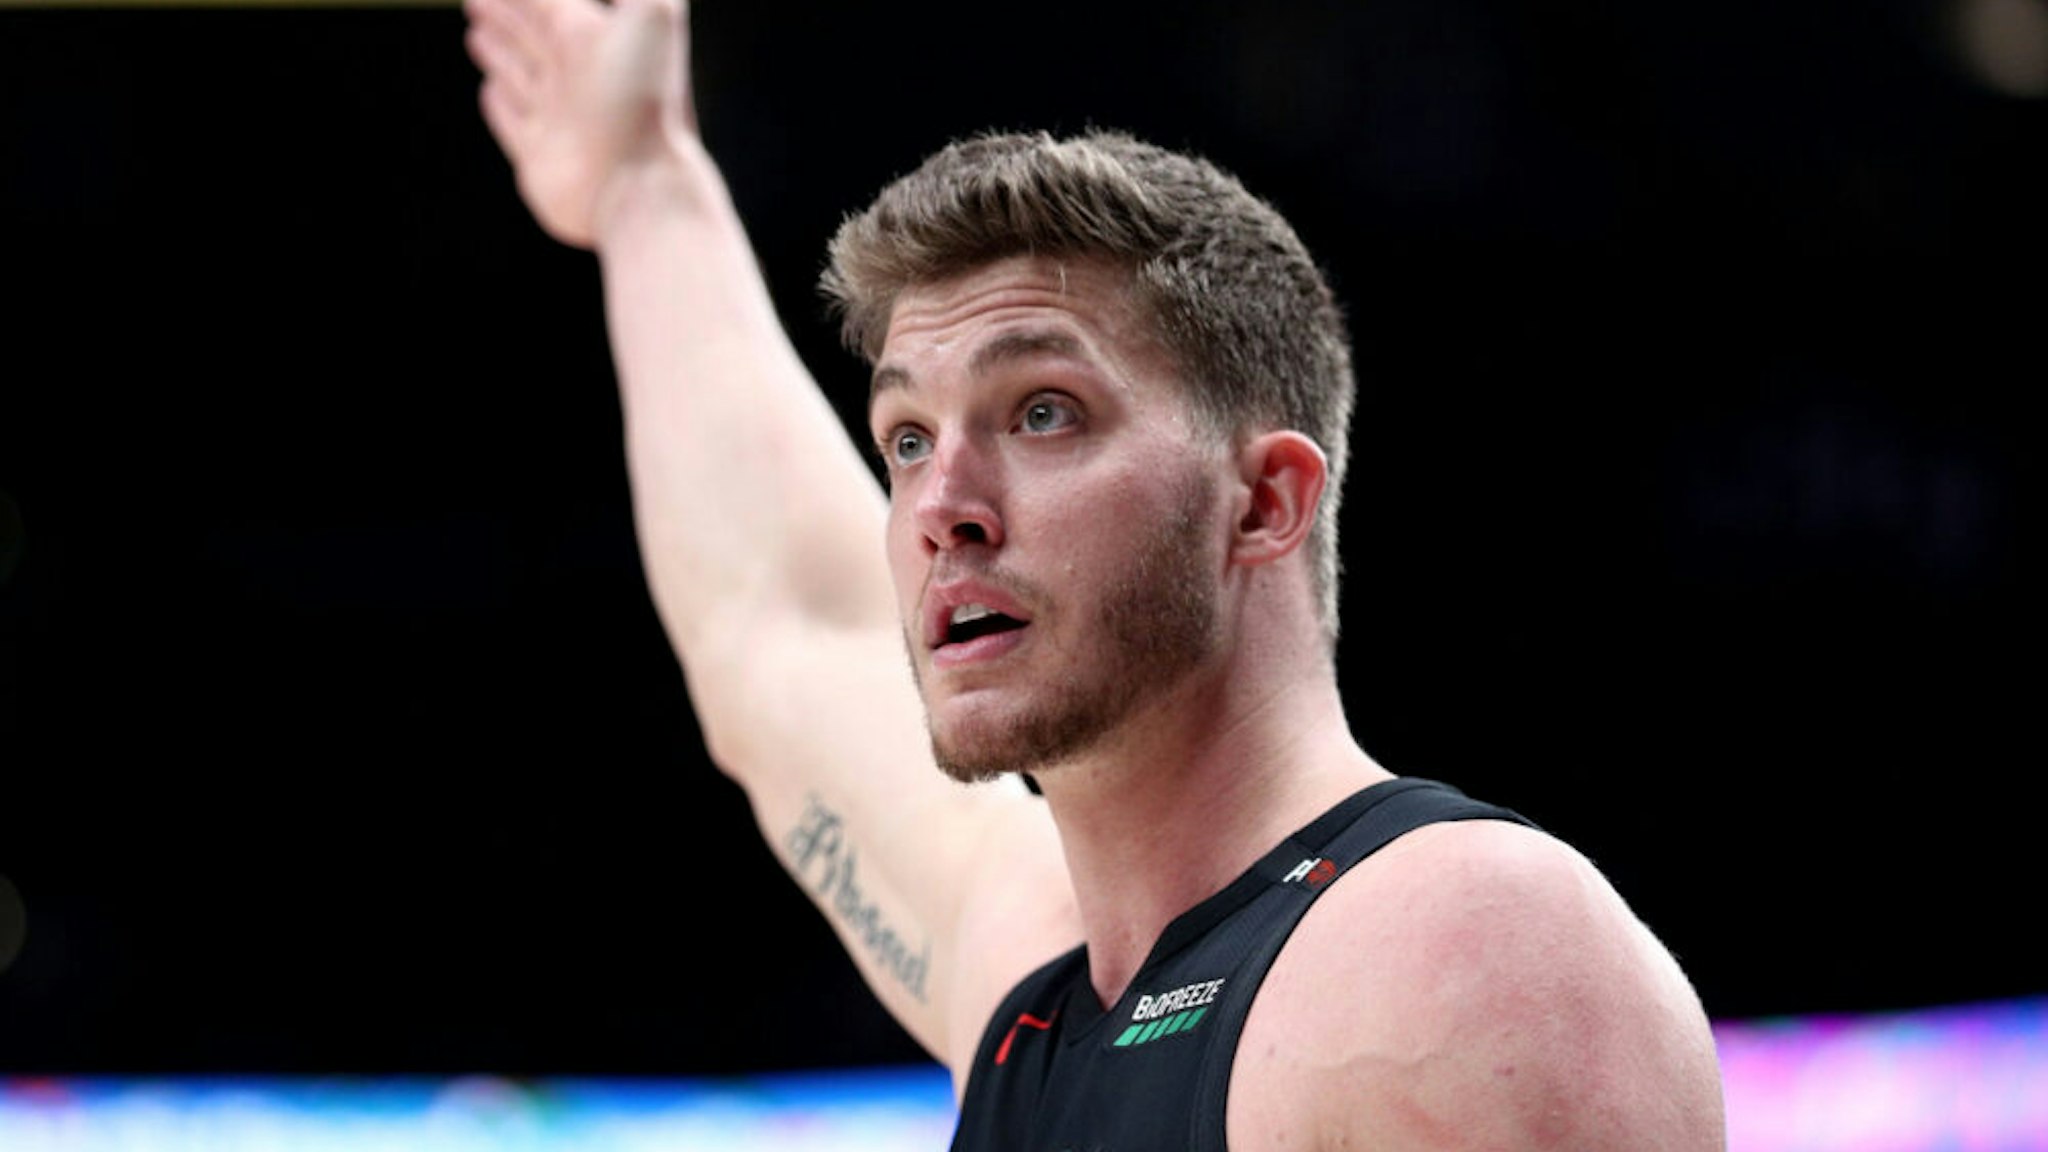 PORTLAND, OR - APRIL 10: Meyers Leonard #11 of the Portland Trail Blazers reacts against the Sacramento Kings in the third quarter during their game at Moda Center on April 10, 2019 in Portland, Oregon. NOTE TO USER: User expressly acknowledges and agrees that, by downloading and or using this photograph, User is consenting to the terms and conditions of the Getty Images License Agreement.